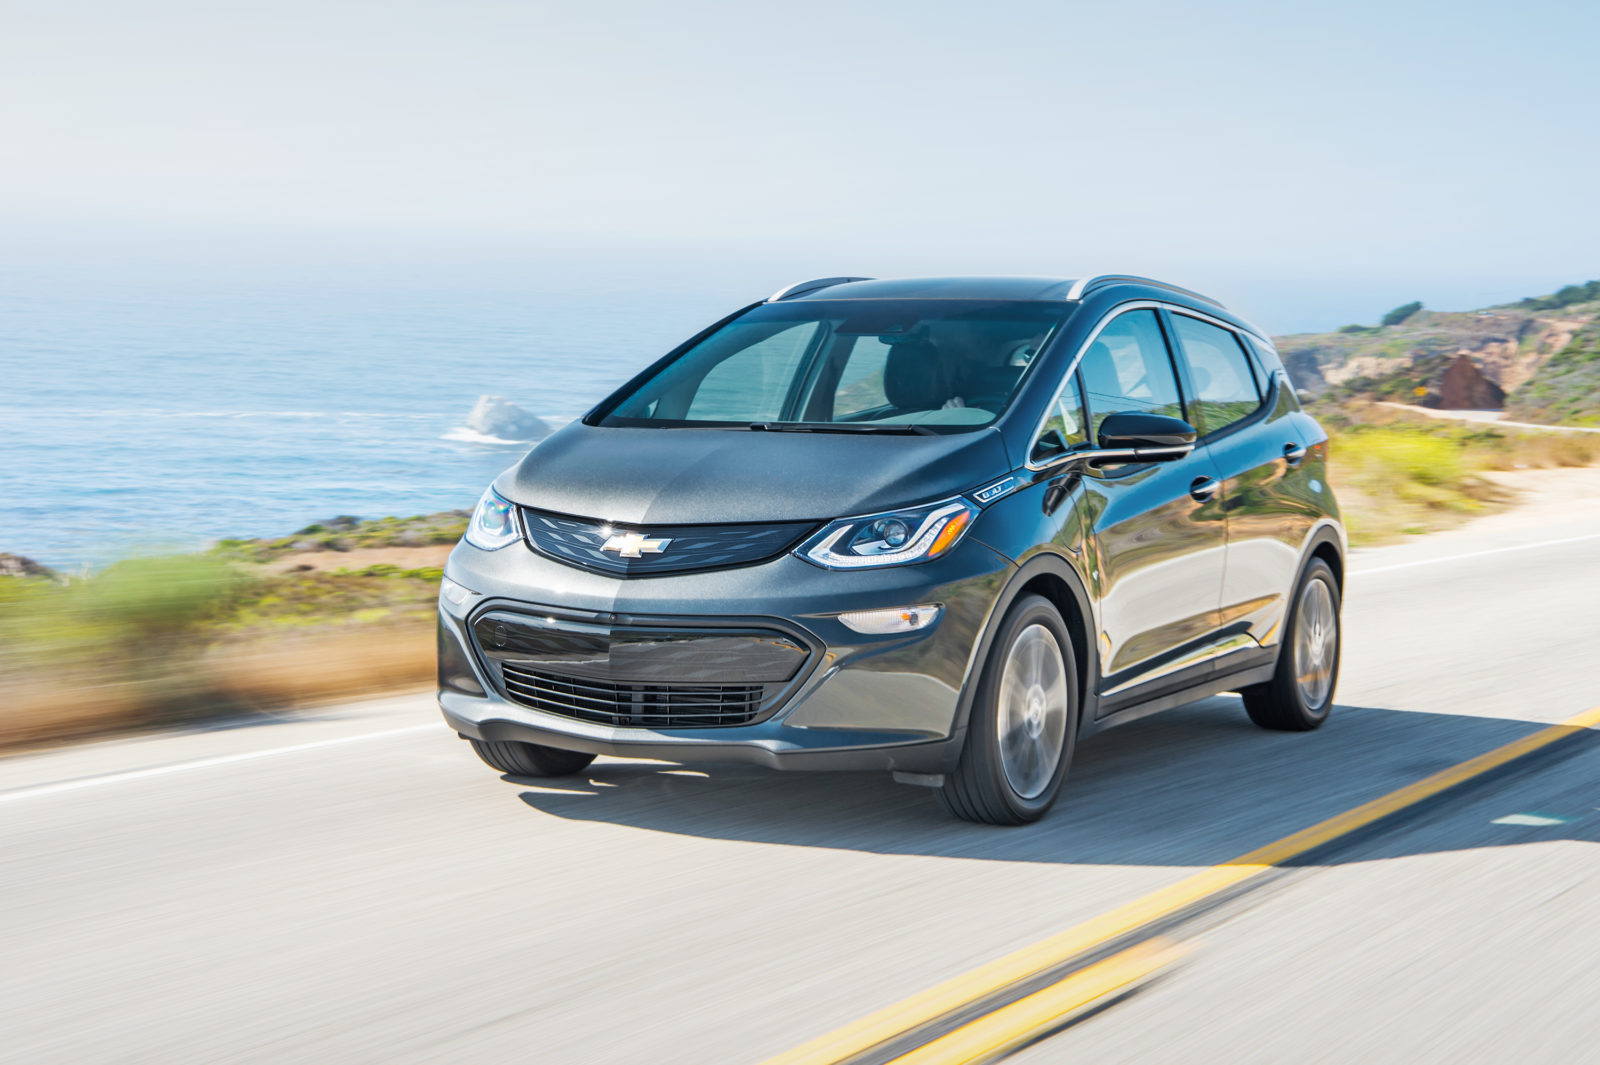 GM To Increase Chevy Bolt Production By 20%